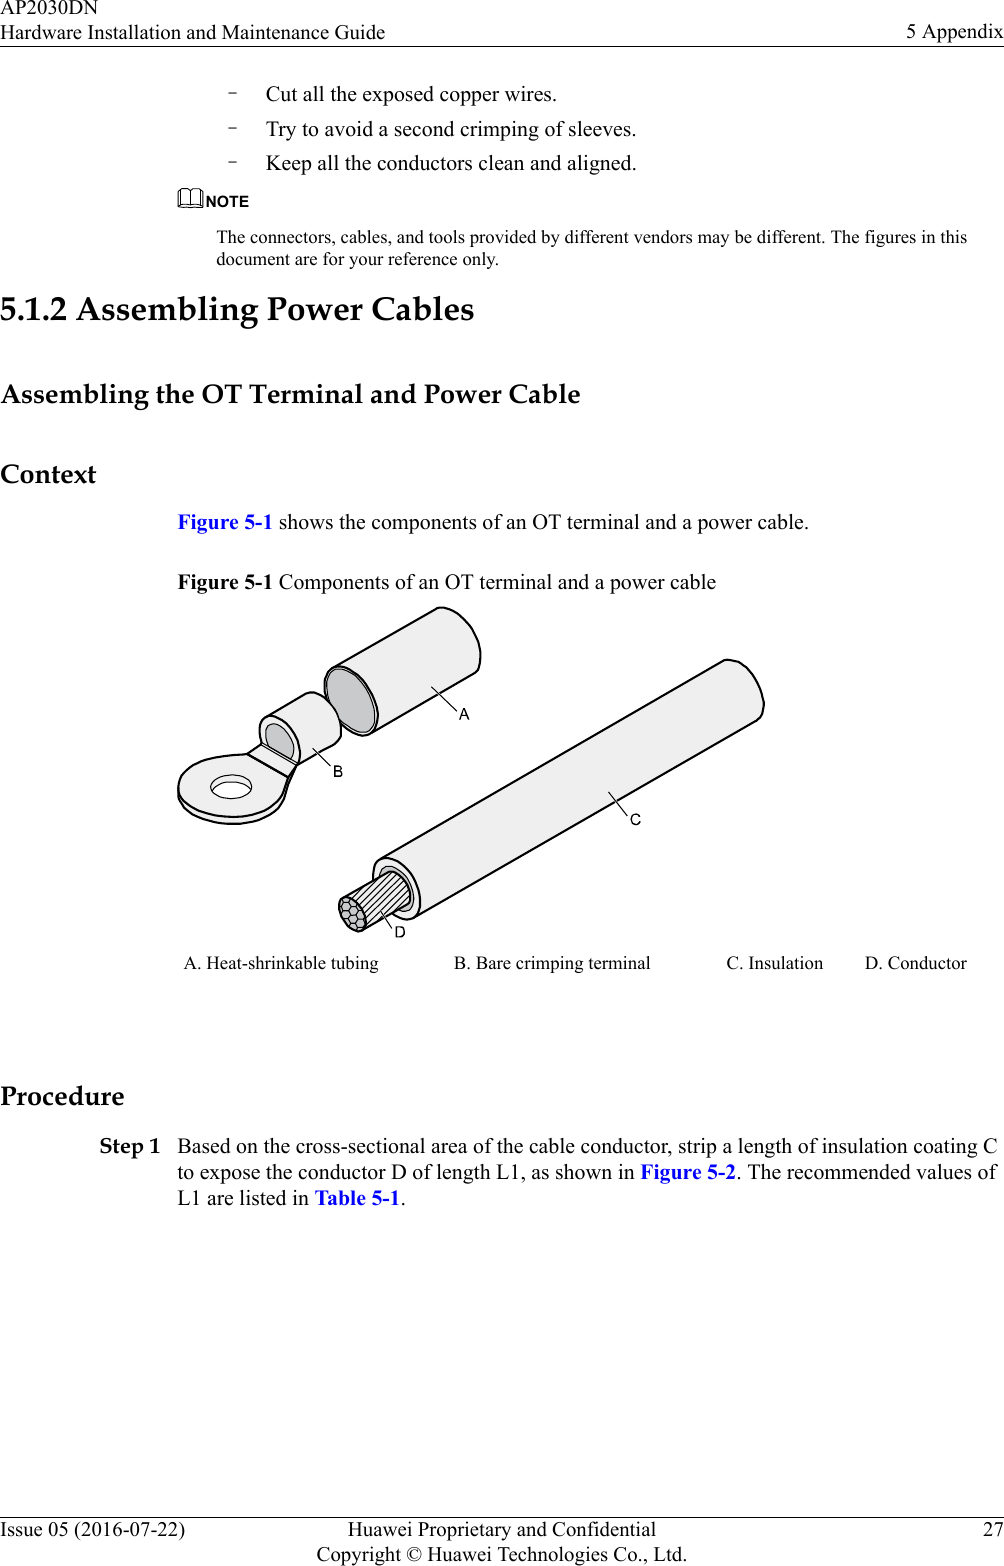 –Cut all the exposed copper wires.–Try to avoid a second crimping of sleeves.–Keep all the conductors clean and aligned.NOTEThe connectors, cables, and tools provided by different vendors may be different. The figures in thisdocument are for your reference only.5.1.2 Assembling Power CablesAssembling the OT Terminal and Power CableContextFigure 5-1 shows the components of an OT terminal and a power cable.Figure 5-1 Components of an OT terminal and a power cableA. Heat-shrinkable tubing B. Bare crimping terminal C. Insulation D. Conductor ProcedureStep 1 Based on the cross-sectional area of the cable conductor, strip a length of insulation coating Cto expose the conductor D of length L1, as shown in Figure 5-2. The recommended values ofL1 are listed in Table 5-1.AP2030DNHardware Installation and Maintenance Guide 5 AppendixIssue 05 (2016-07-22) Huawei Proprietary and ConfidentialCopyright © Huawei Technologies Co., Ltd.27